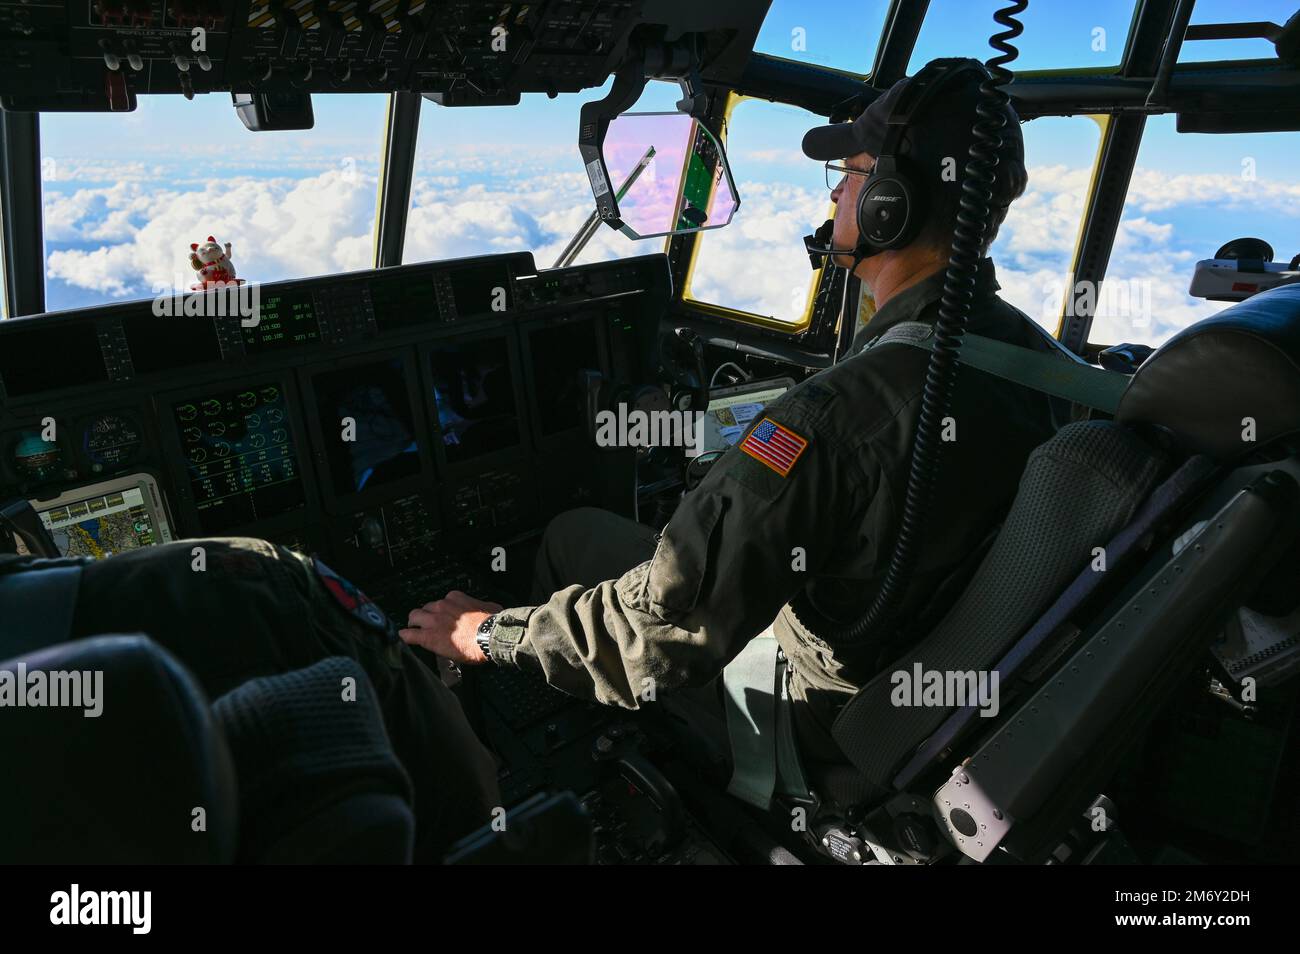 U.S. Air Force Col. Jeffrey Waldman, previous commander of the 129th Rescue Wing, copilots a flight in a HC-130J Combat King II to Socorro Island off the coast of Cabo San Lucas, Mexico, May 9, 2022. This was Waldman’s last rescue mission before he retires. (Air National Guard photo by Airman Serena Smith) (This image has been altered to enhance the subject) Stock Photo